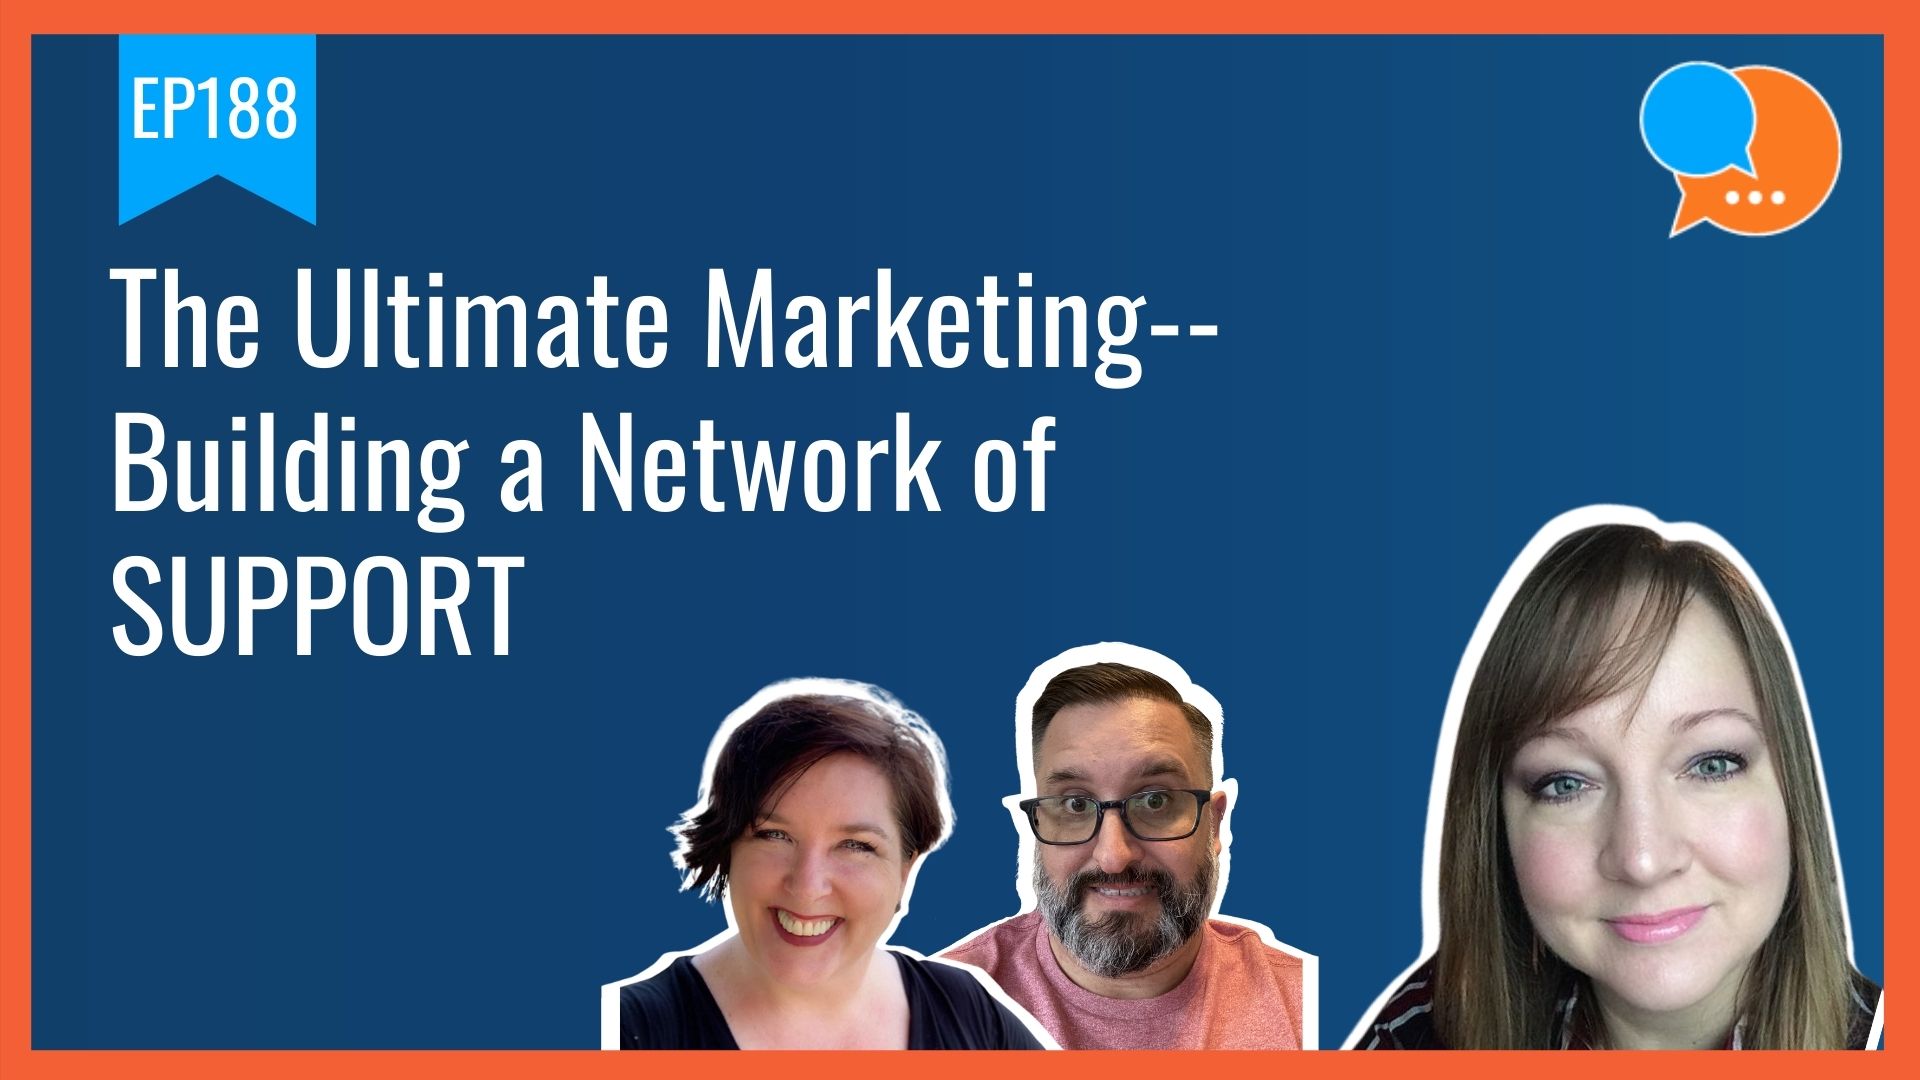 EP188 The Ultimate Marketing Building a Network of SUPPORT Smart Marketing Show yt